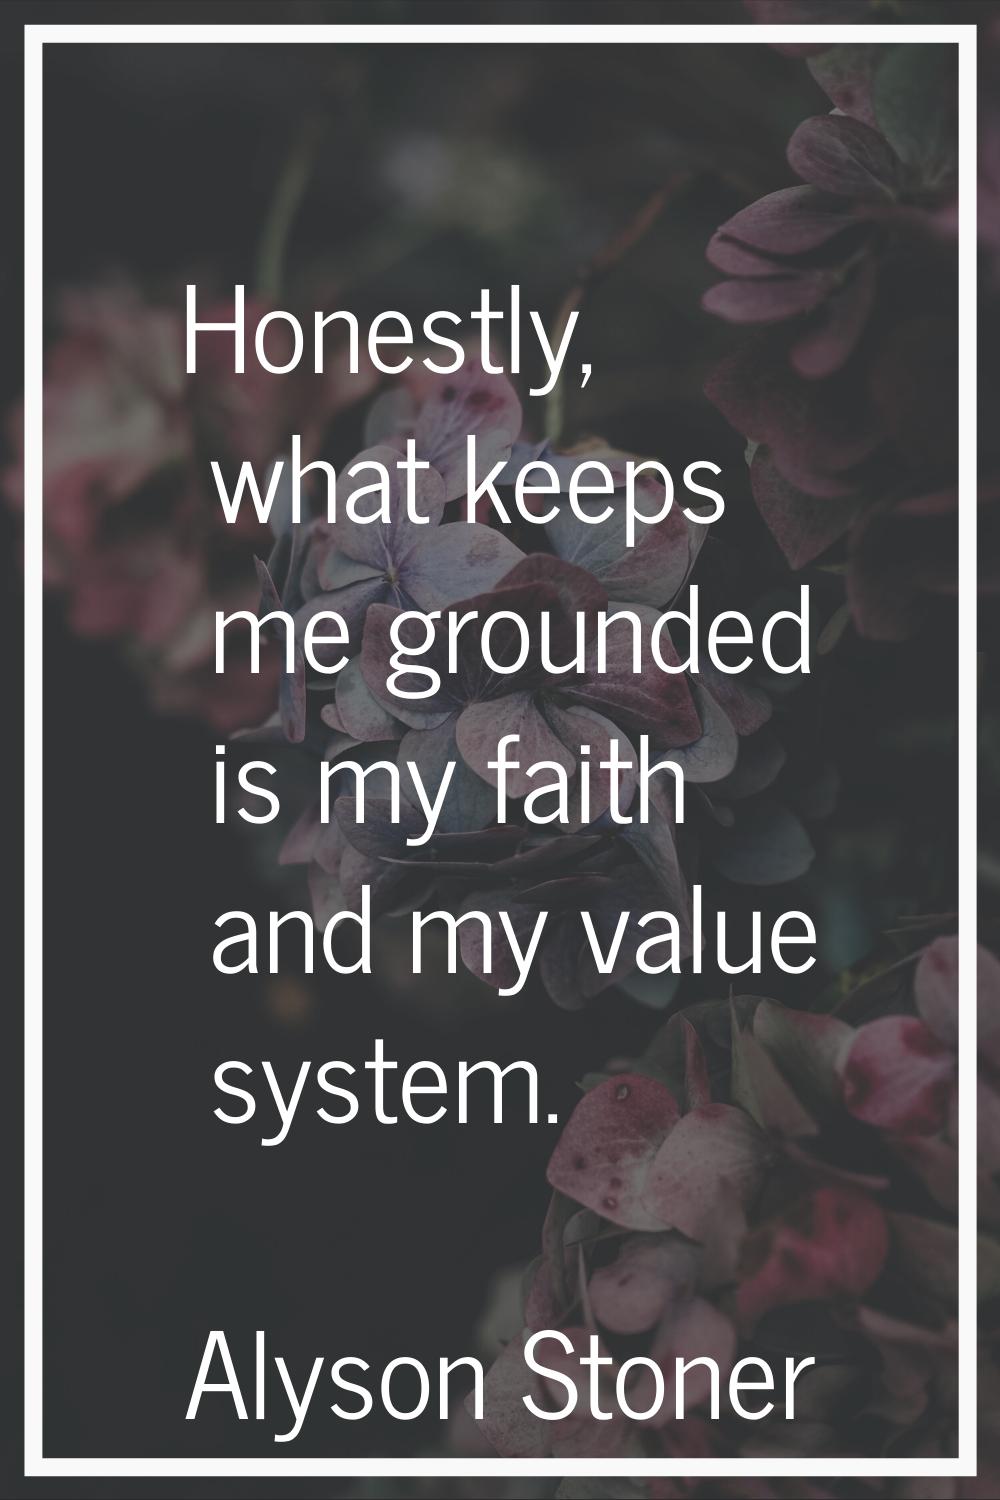 Honestly, what keeps me grounded is my faith and my value system.